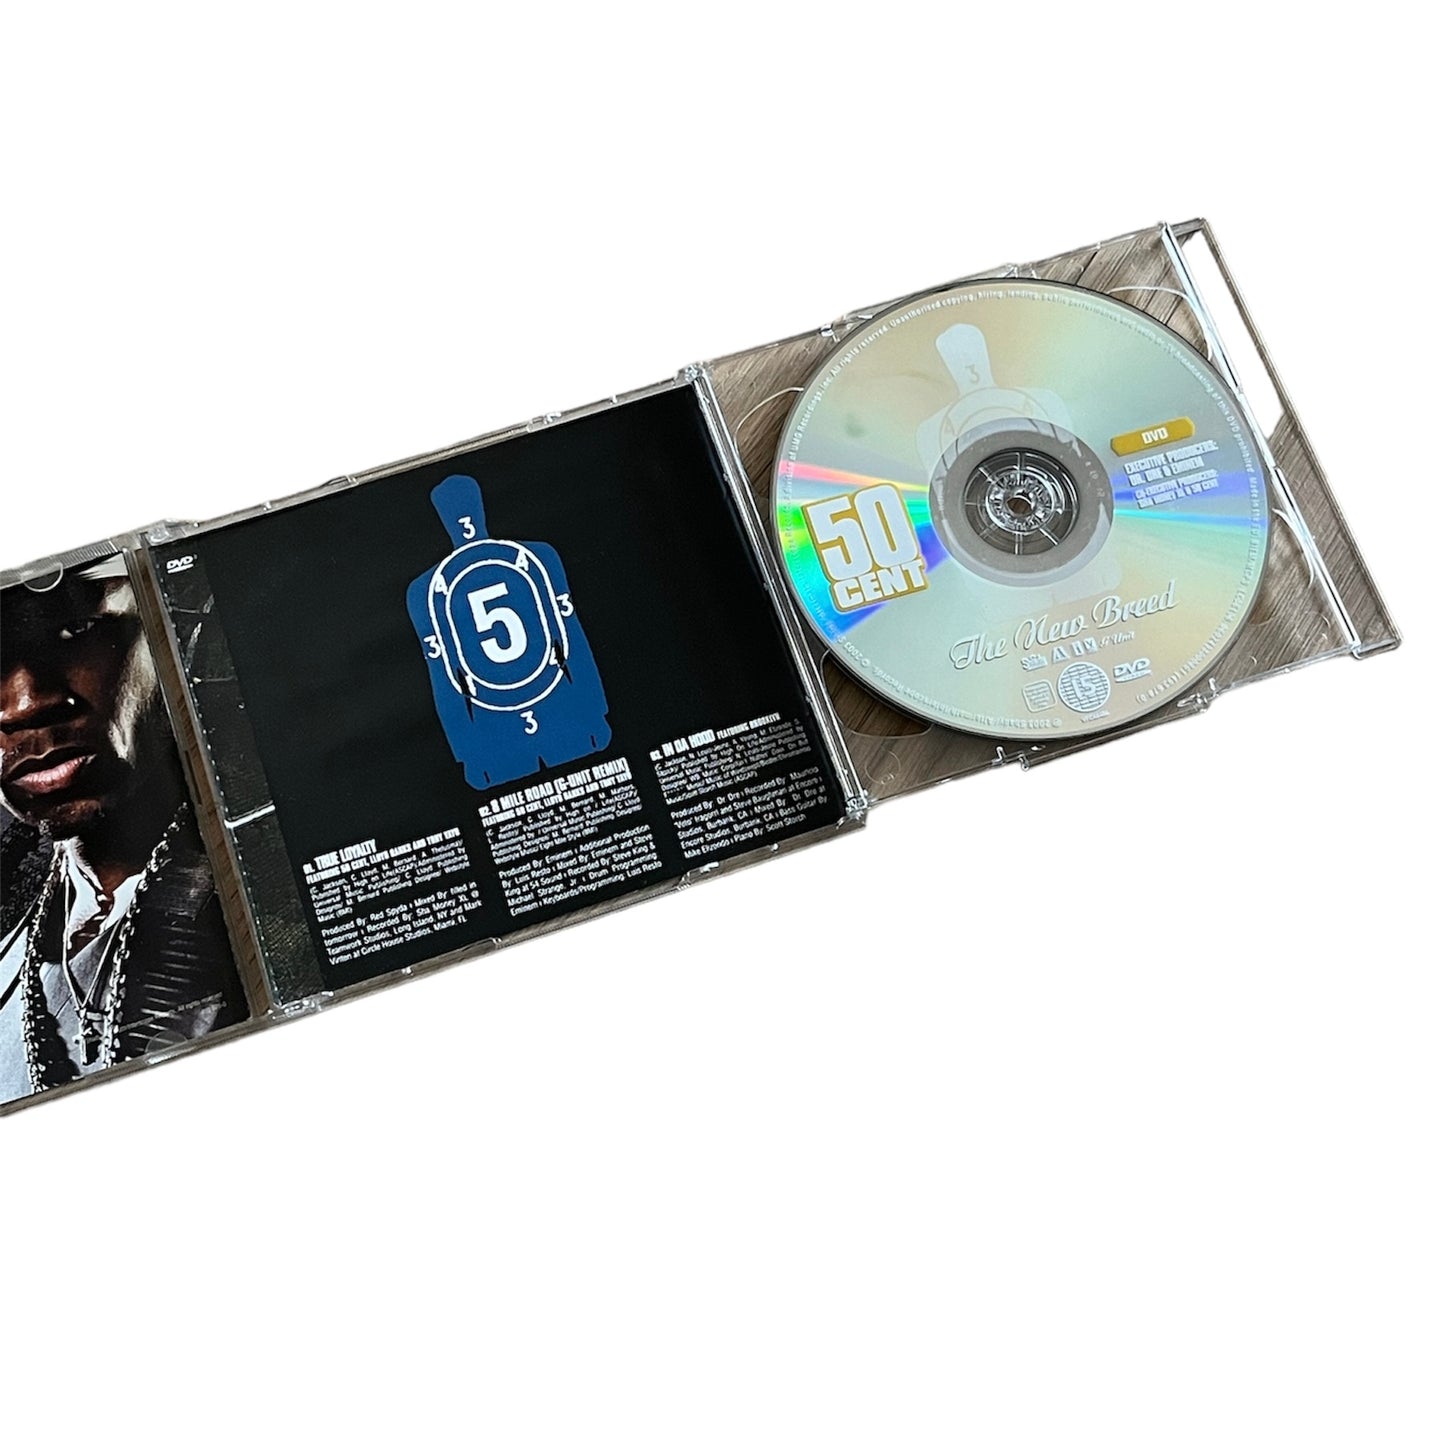 50 CENT - THE NEW BREED - 2003 (CD+DVD)